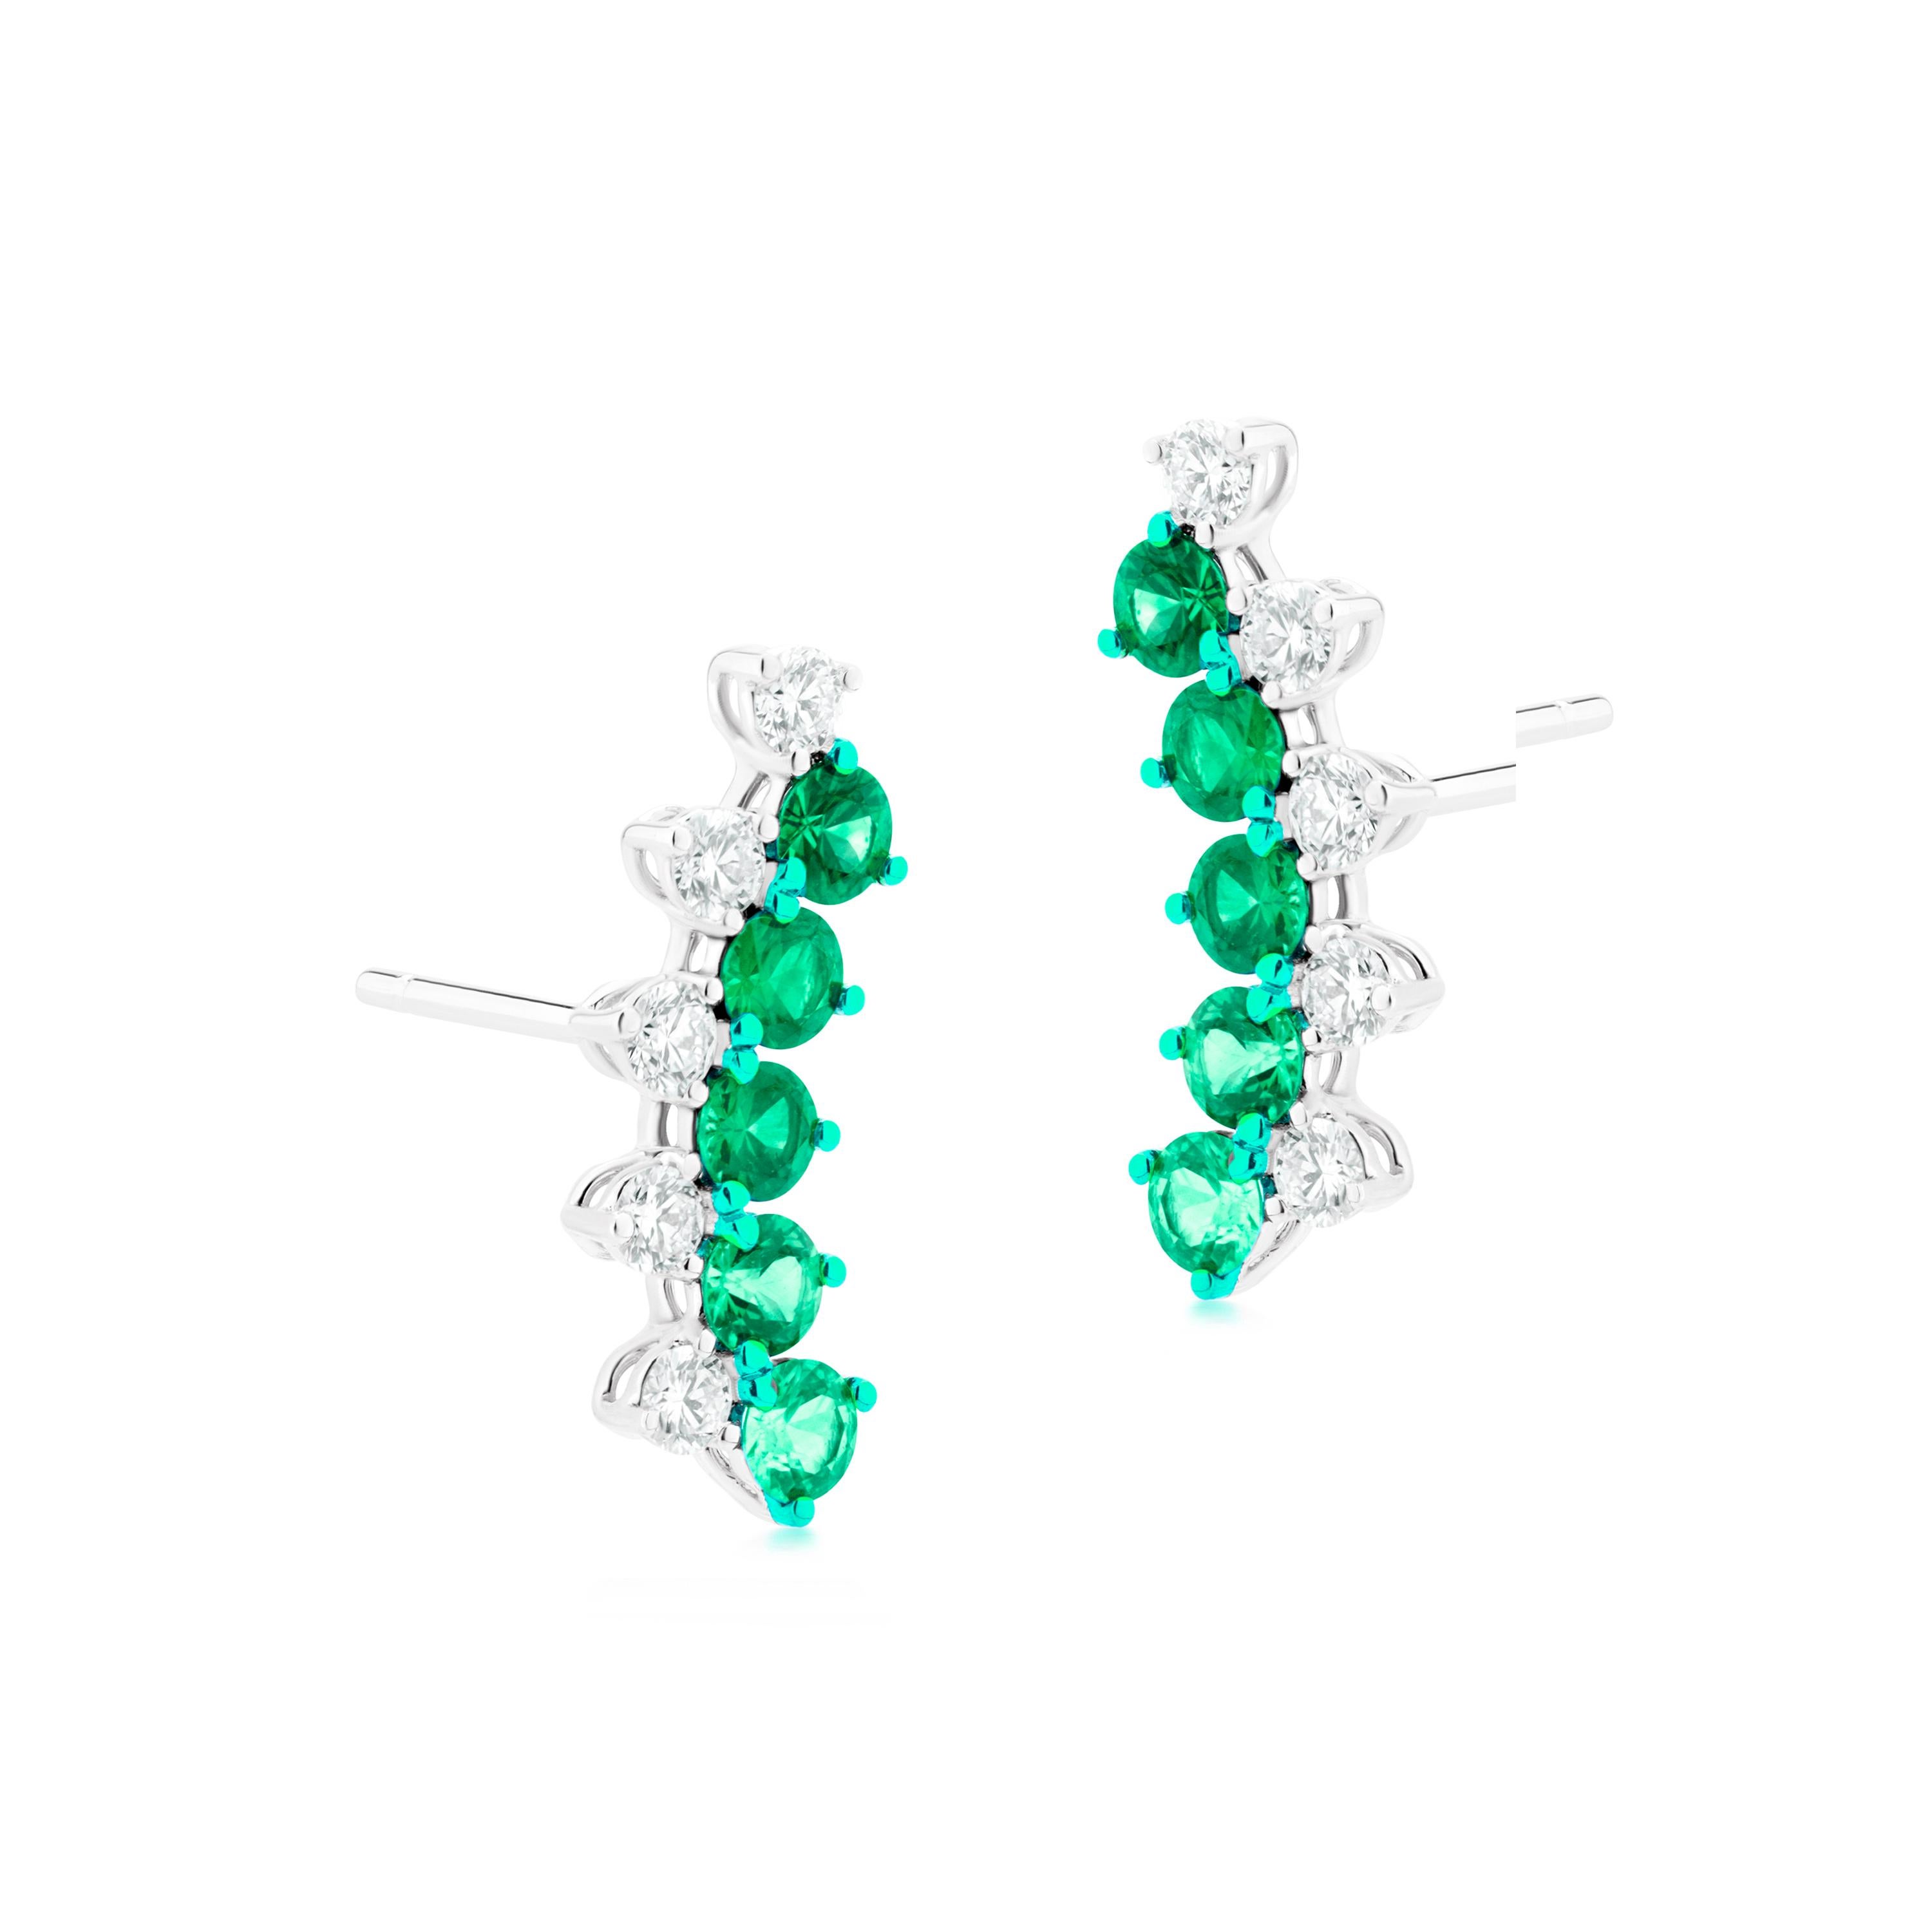 Elevate your elegance with the captivating allure of the Gemistry 1.48 Cttw. Emerald and Diamond Ear Climber in 18K White Gold with exquisite green rhodium accents. This remarkable piece redefines sophistication and style, showcasing a harmonious